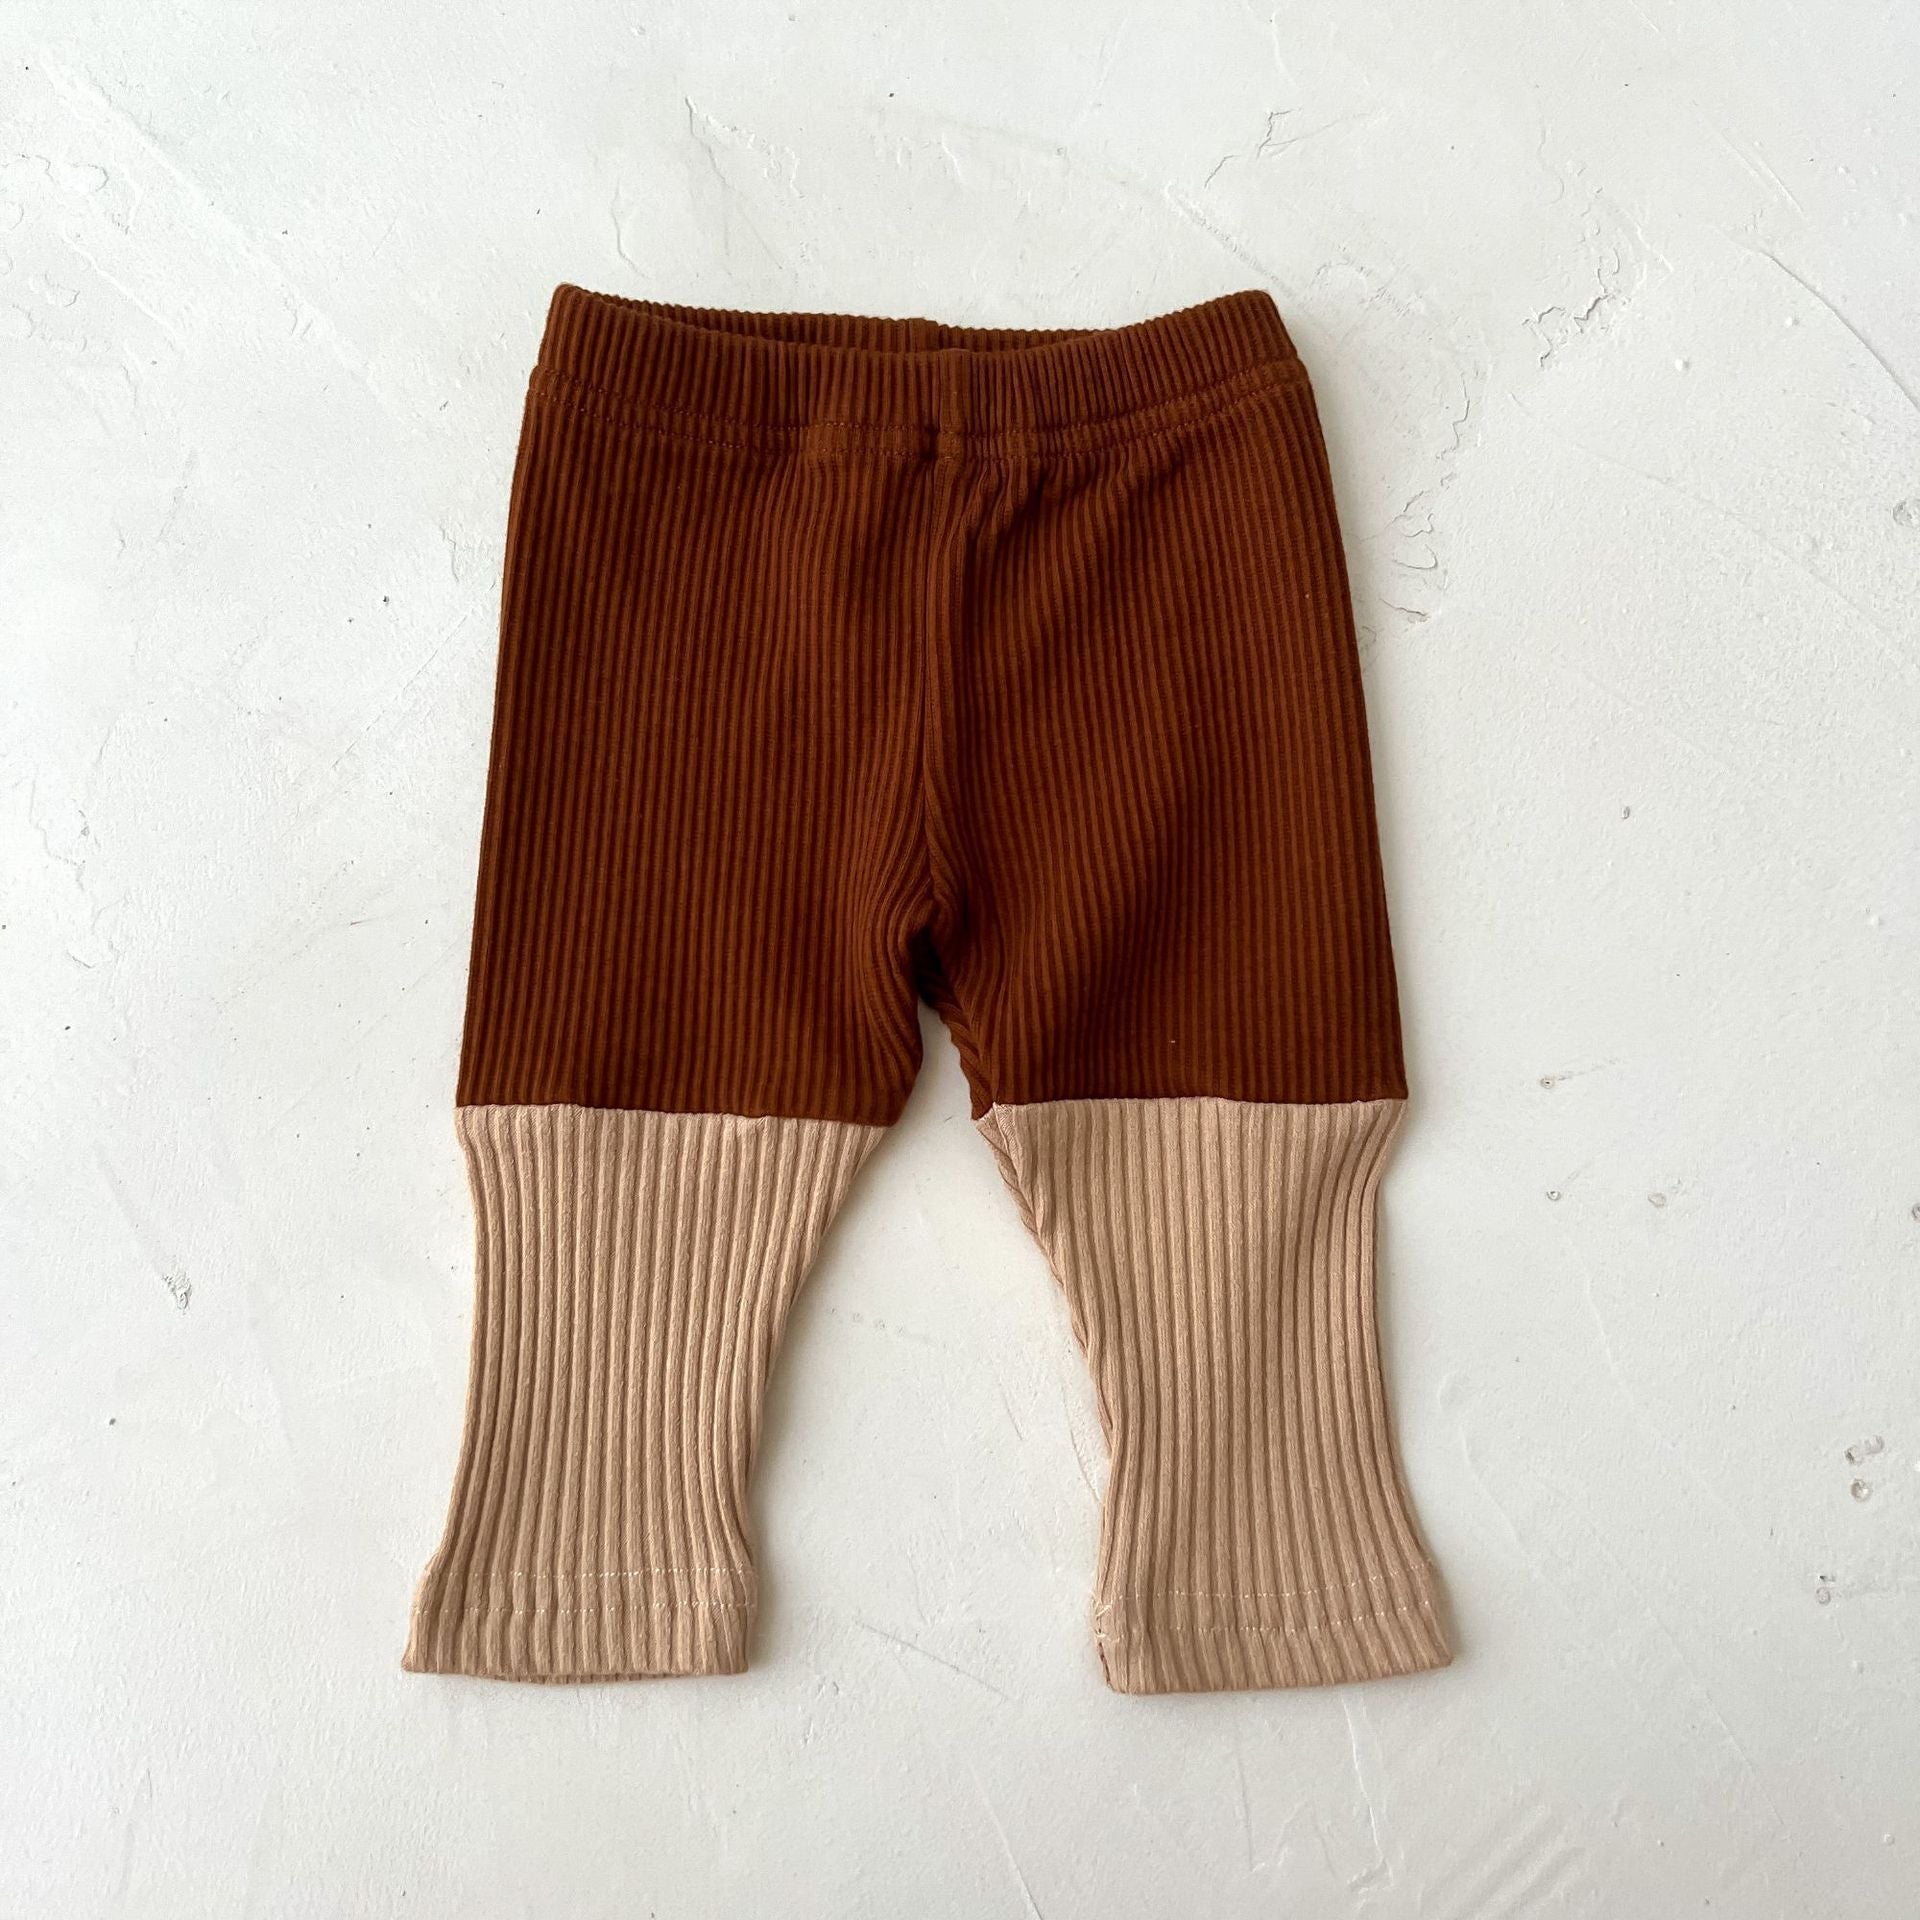 Baby Color matching Pants.